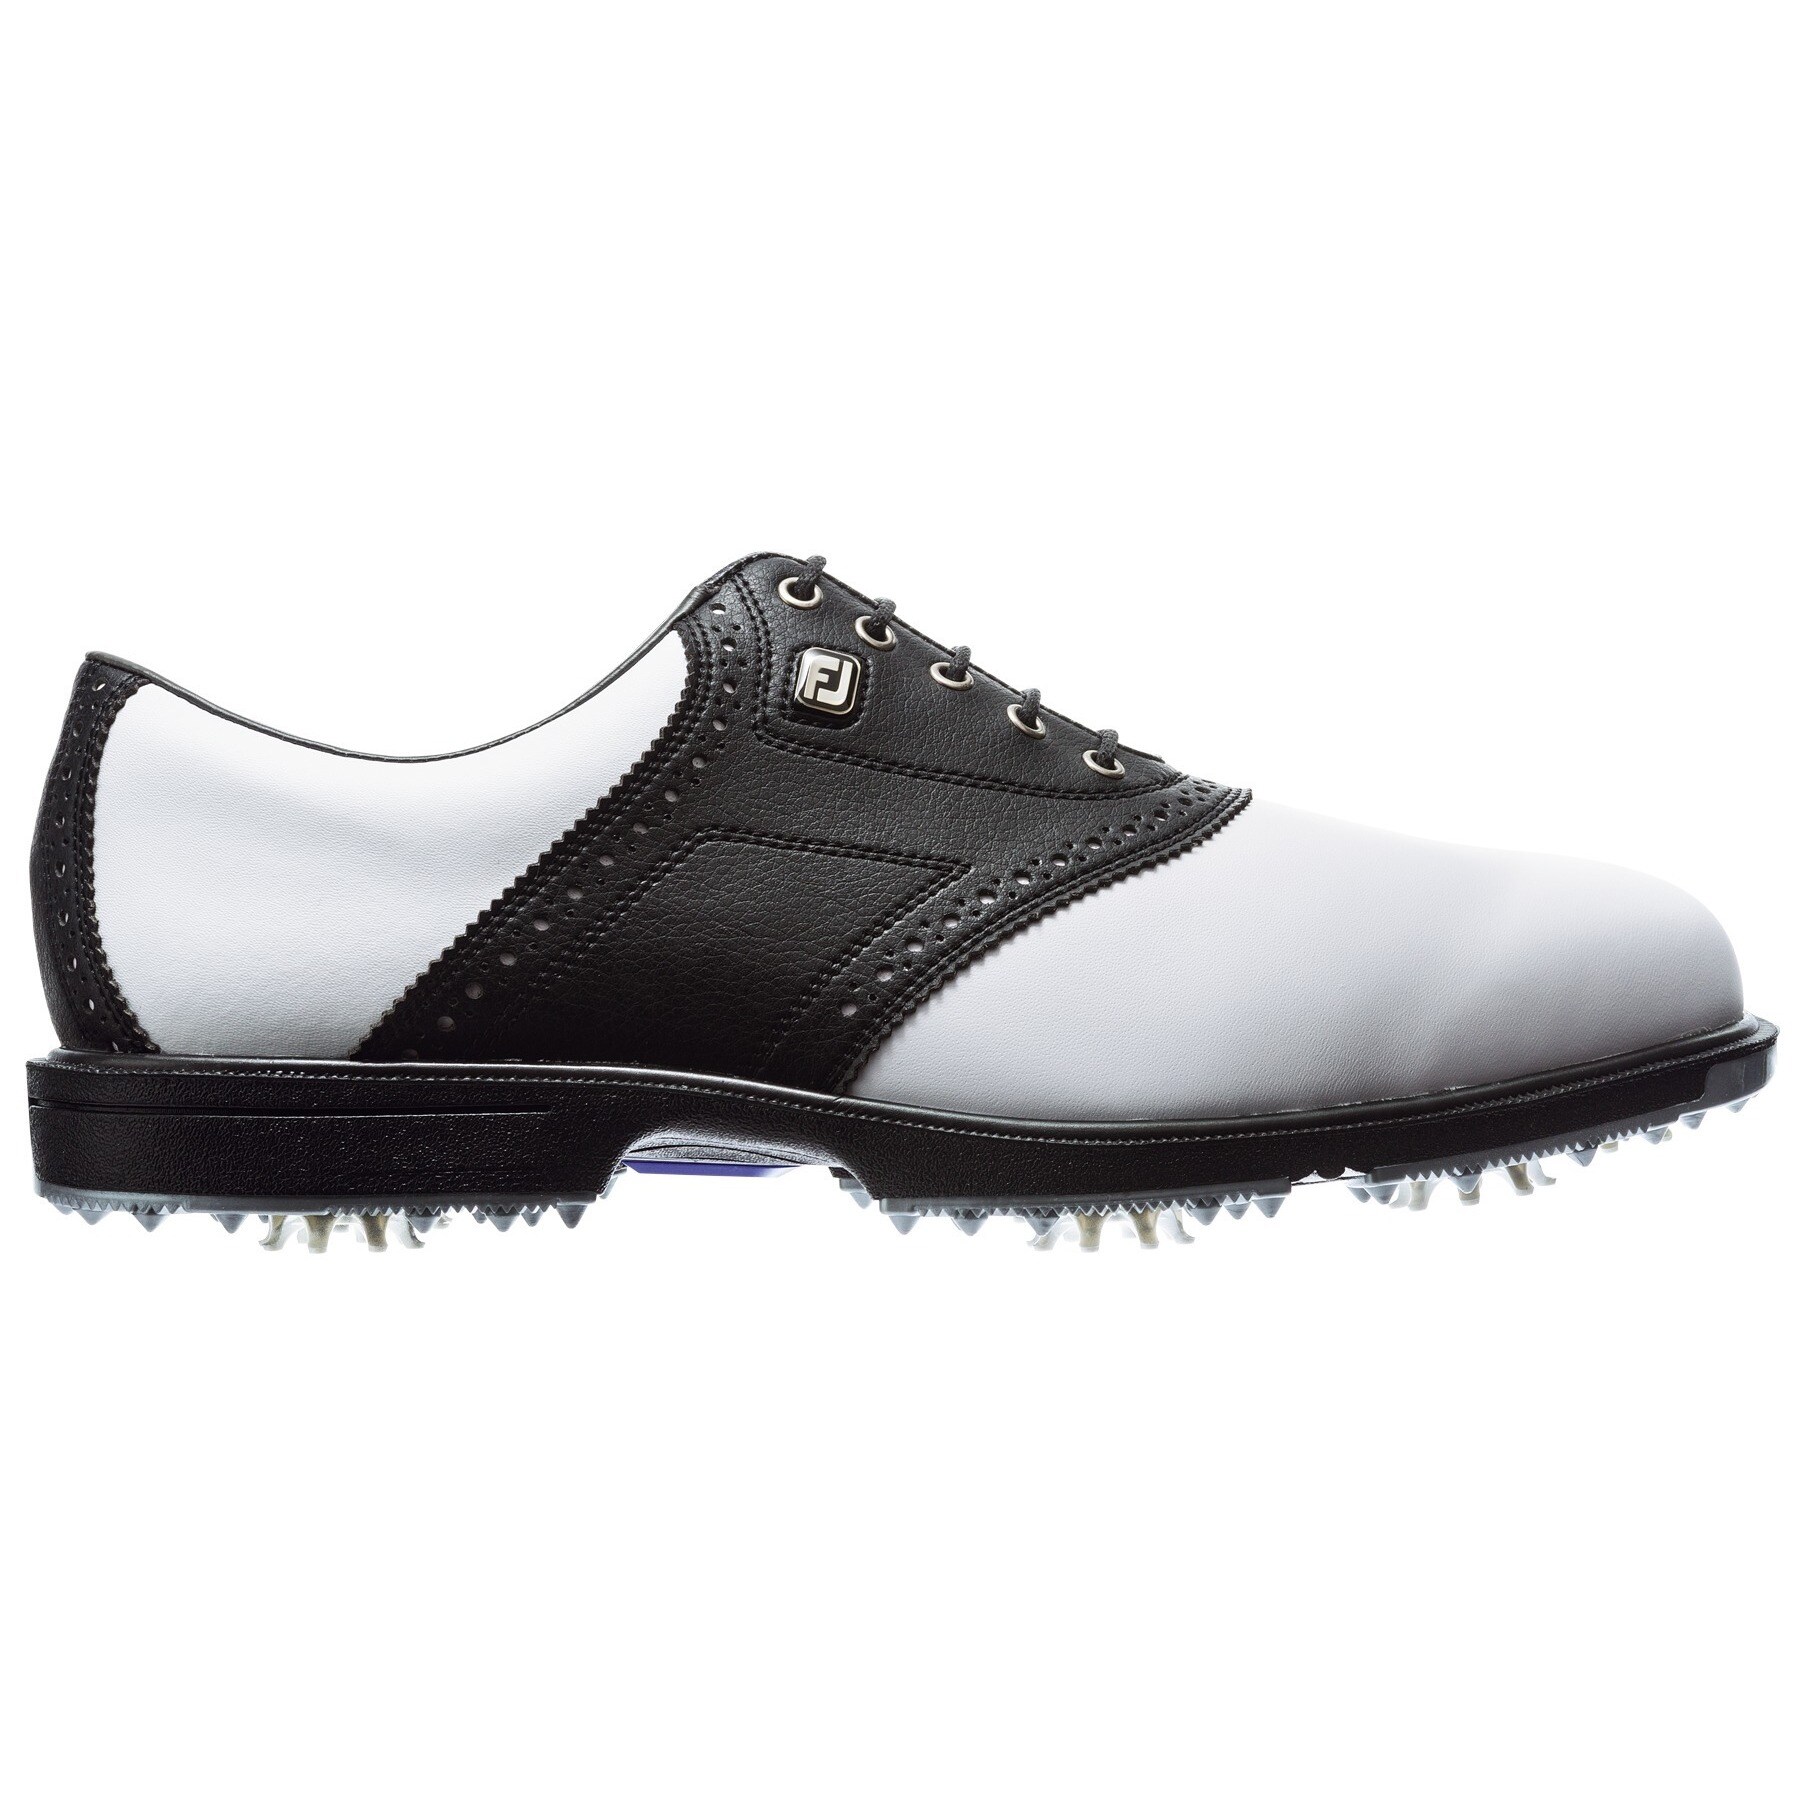 mens black and white saddle shoes